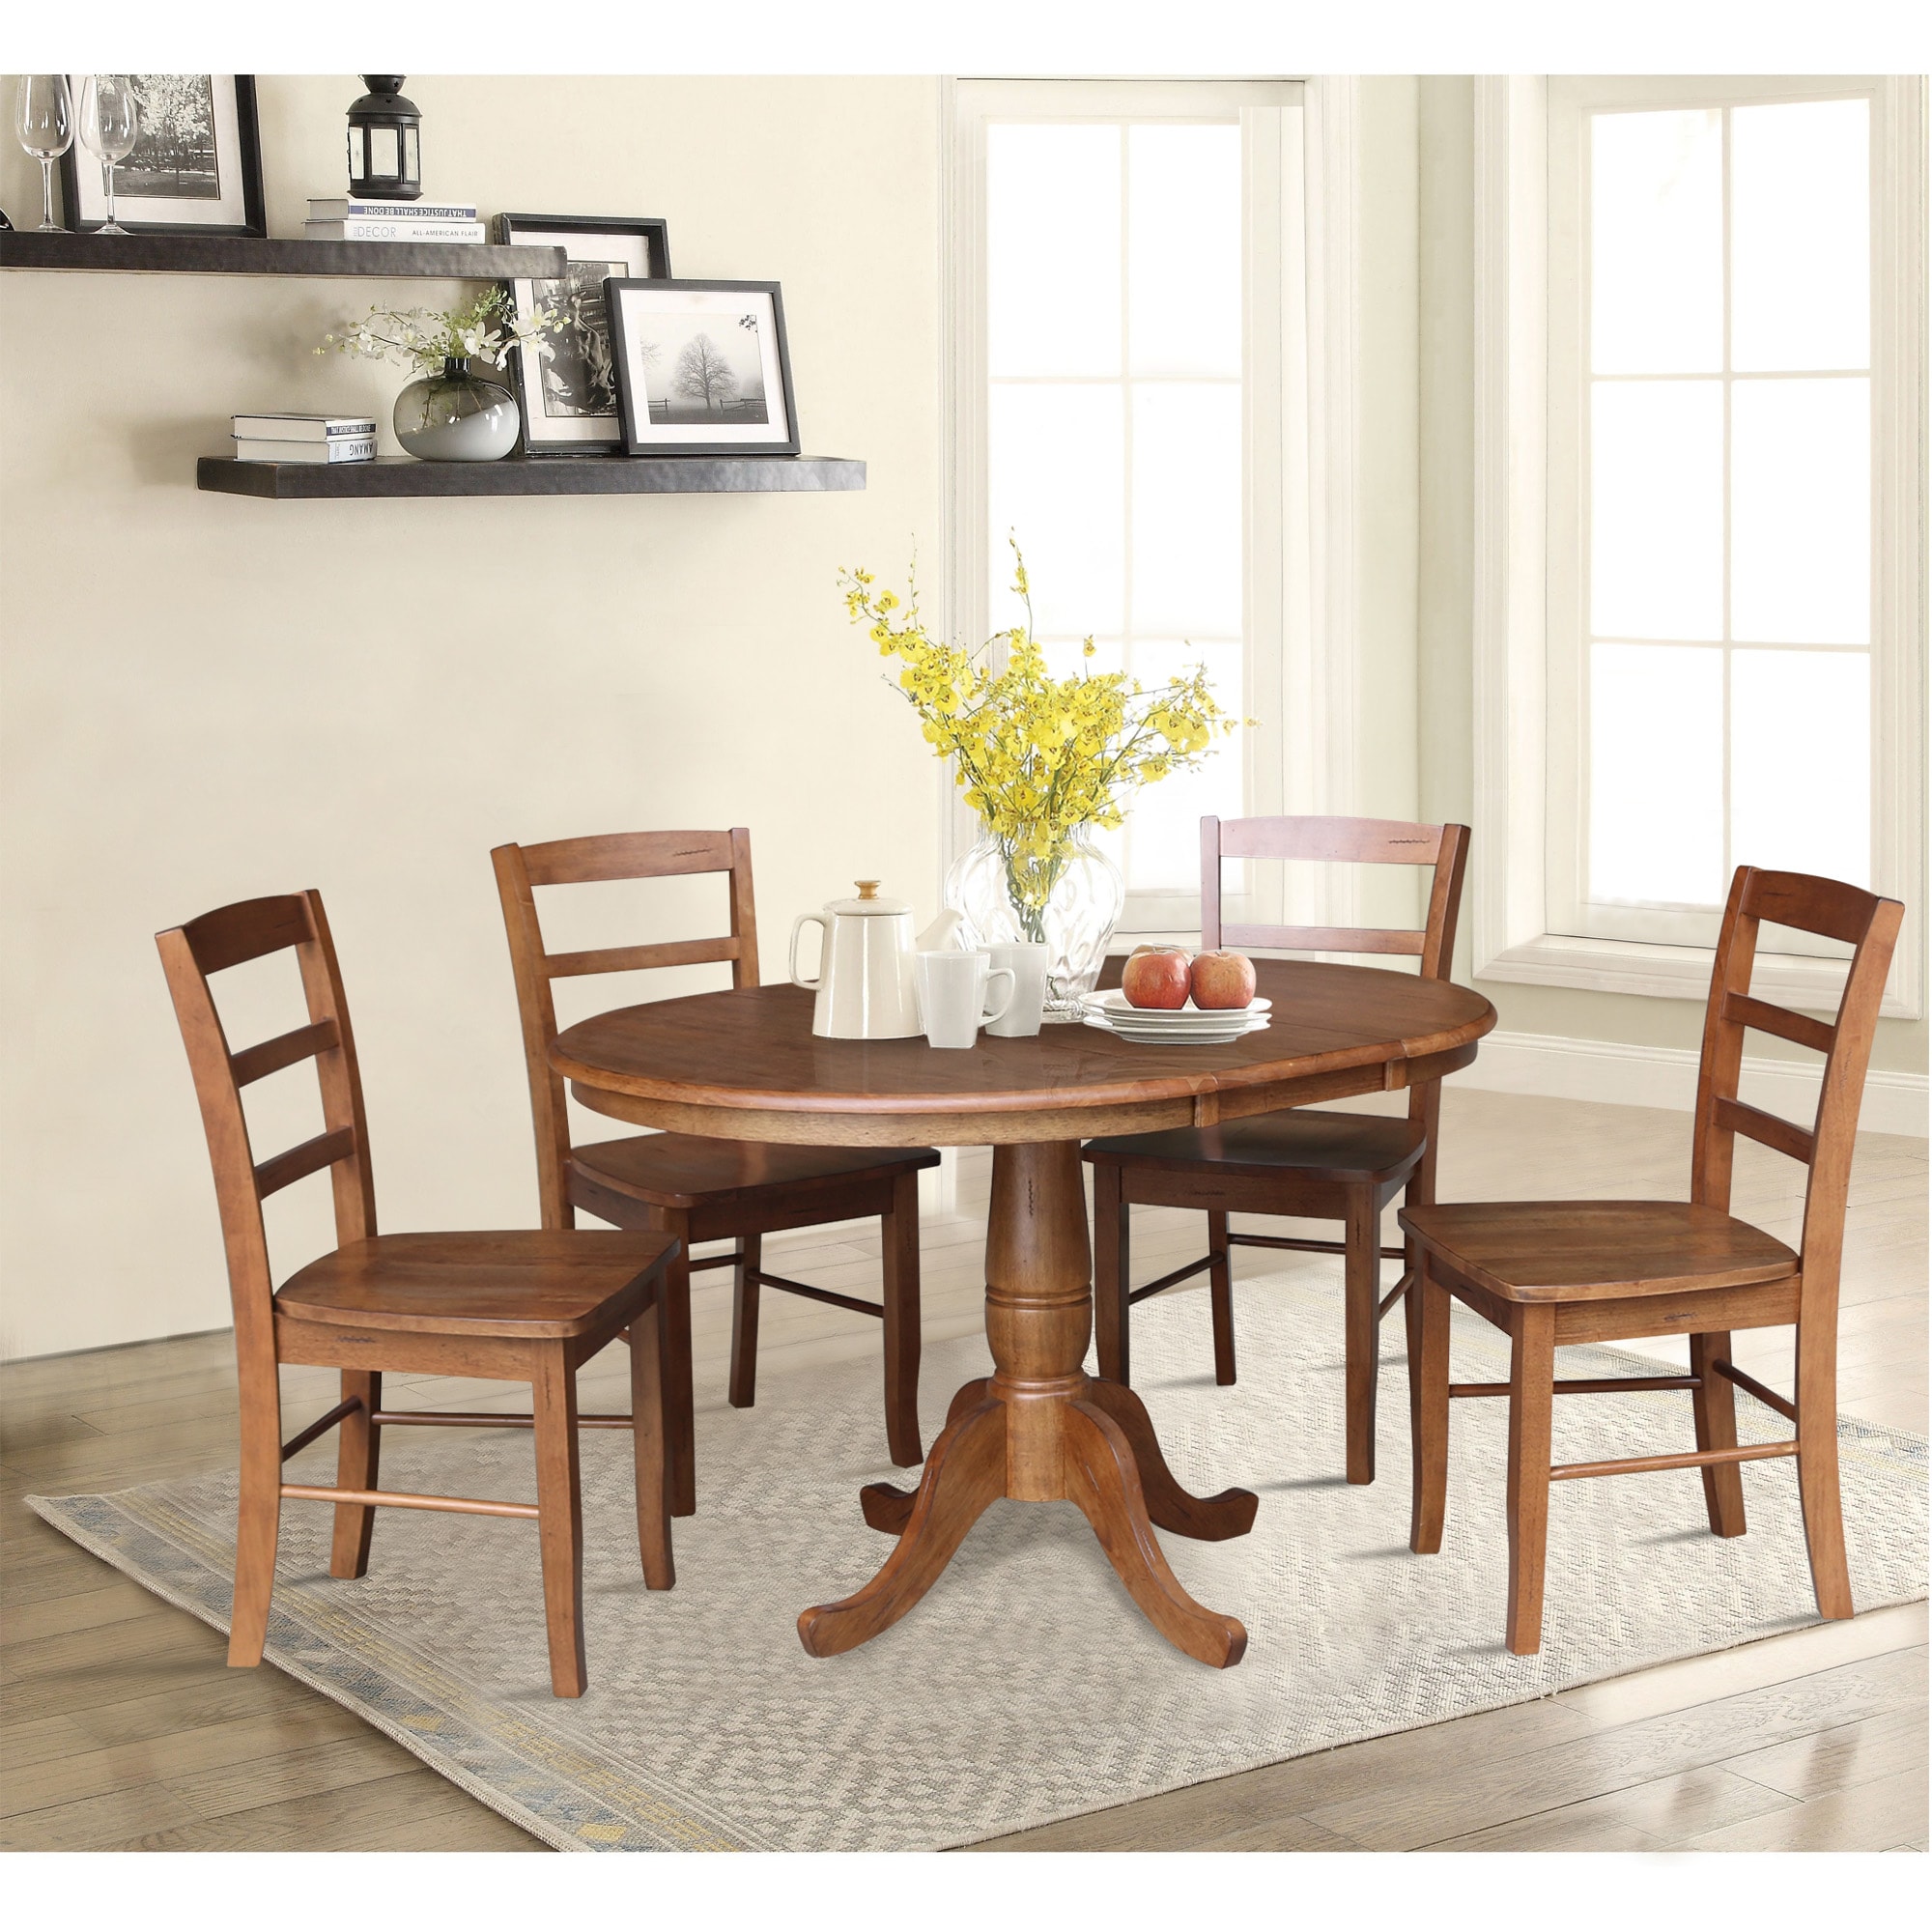 International Concepts Distressed Oak Traditional Dining Room Set with ...